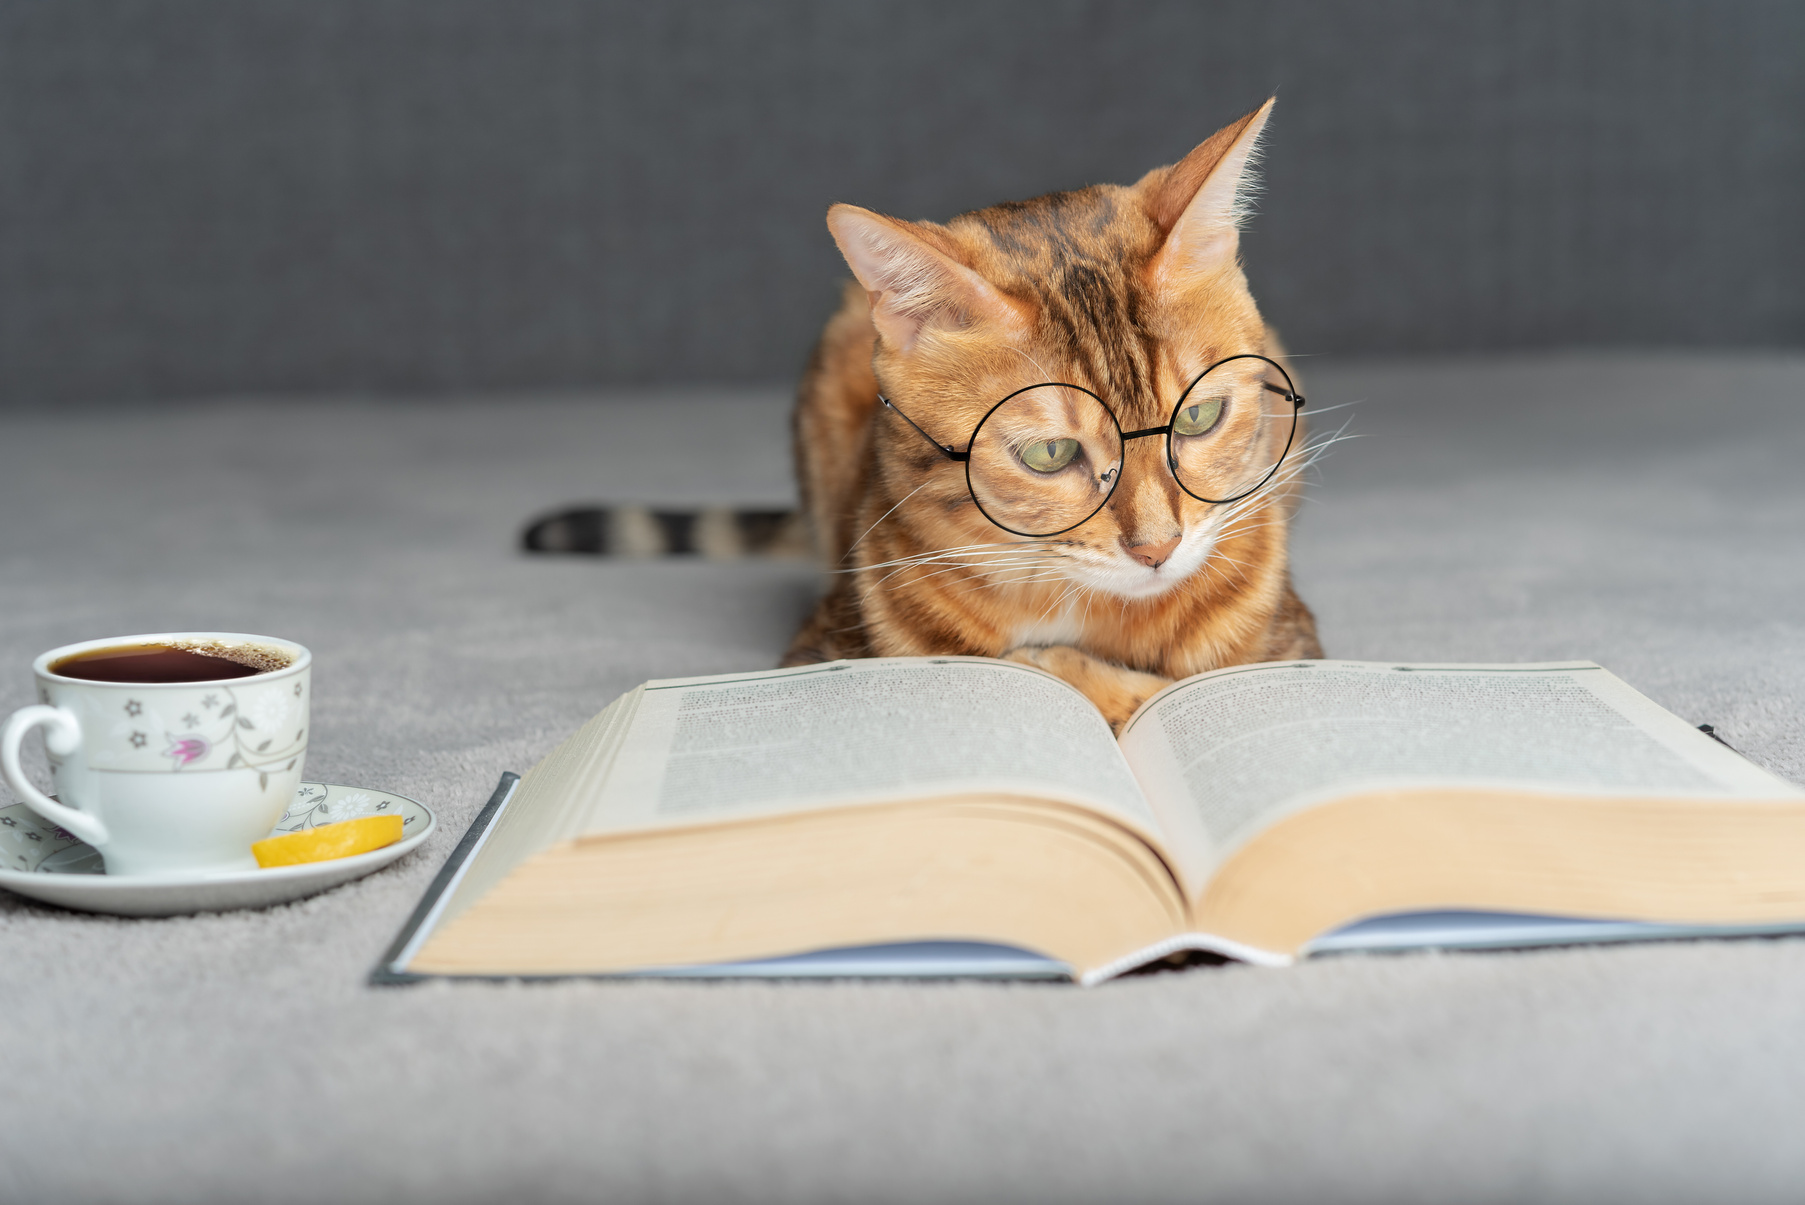 Domestic cat with glasses reads a book.